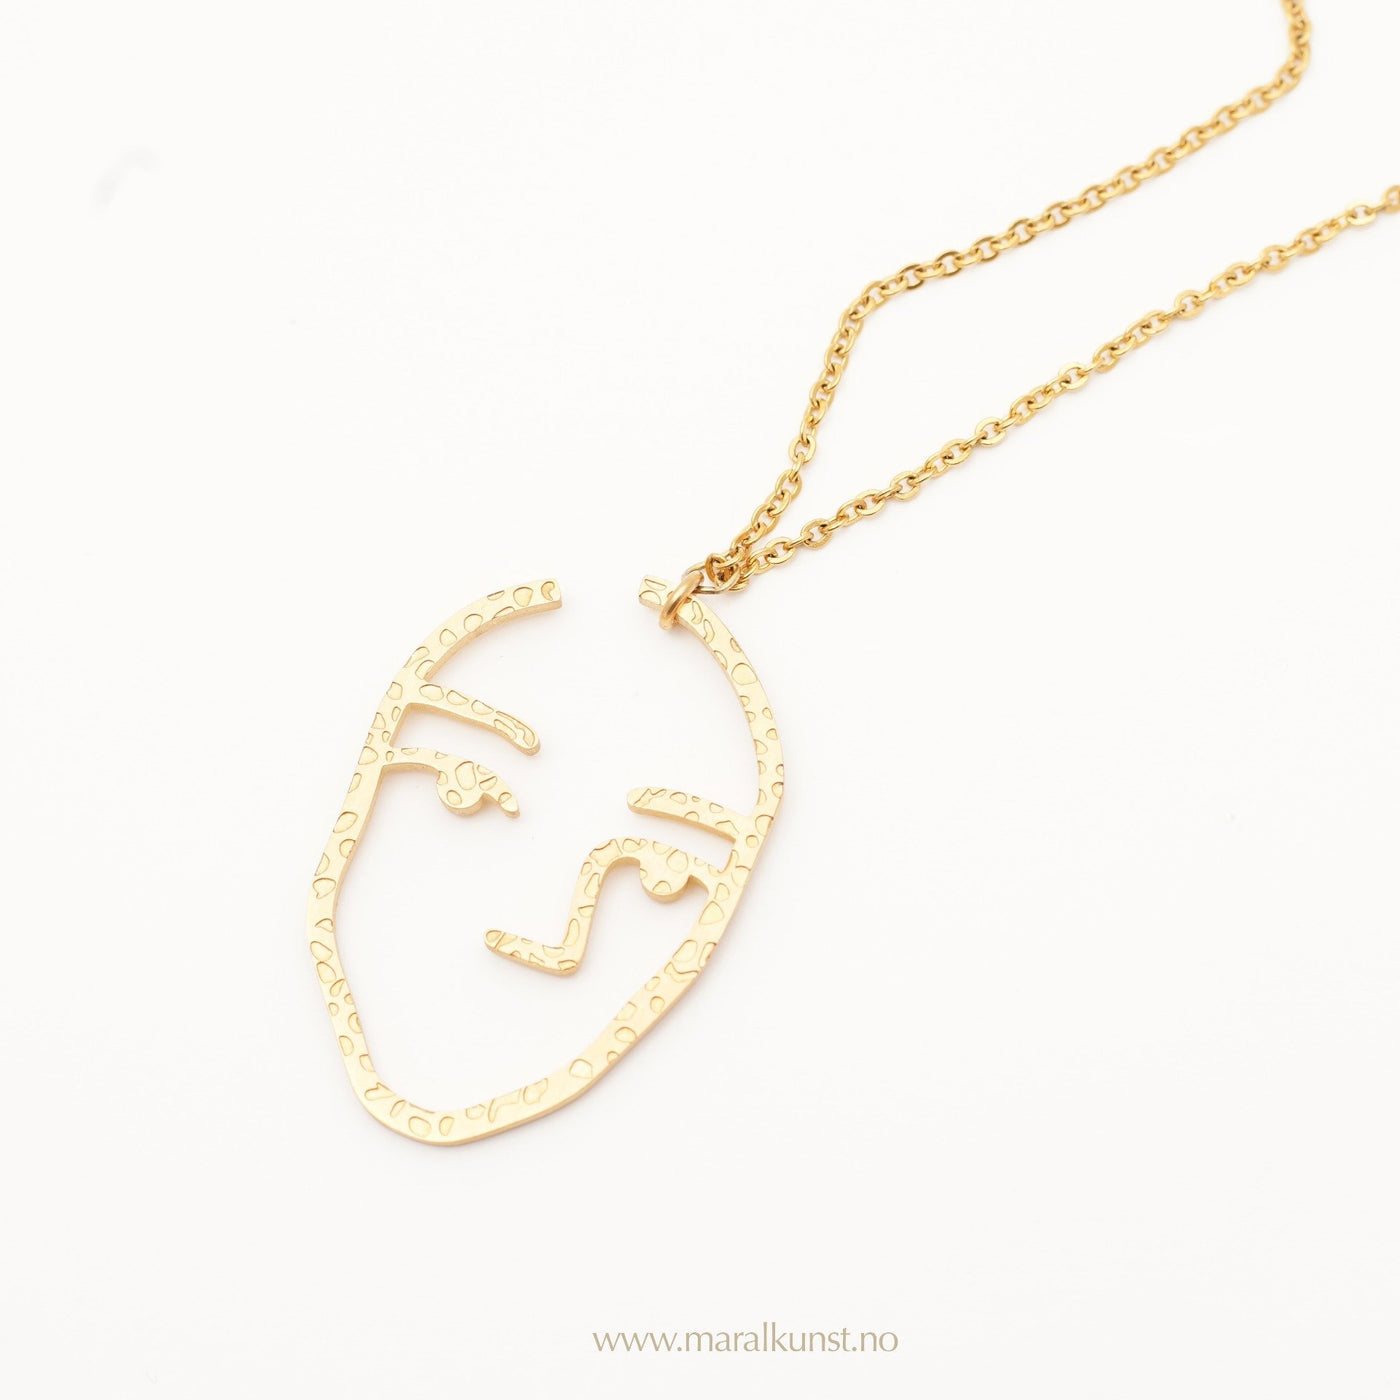 Abstract Face Necklace - Maral Kunst Jewelry